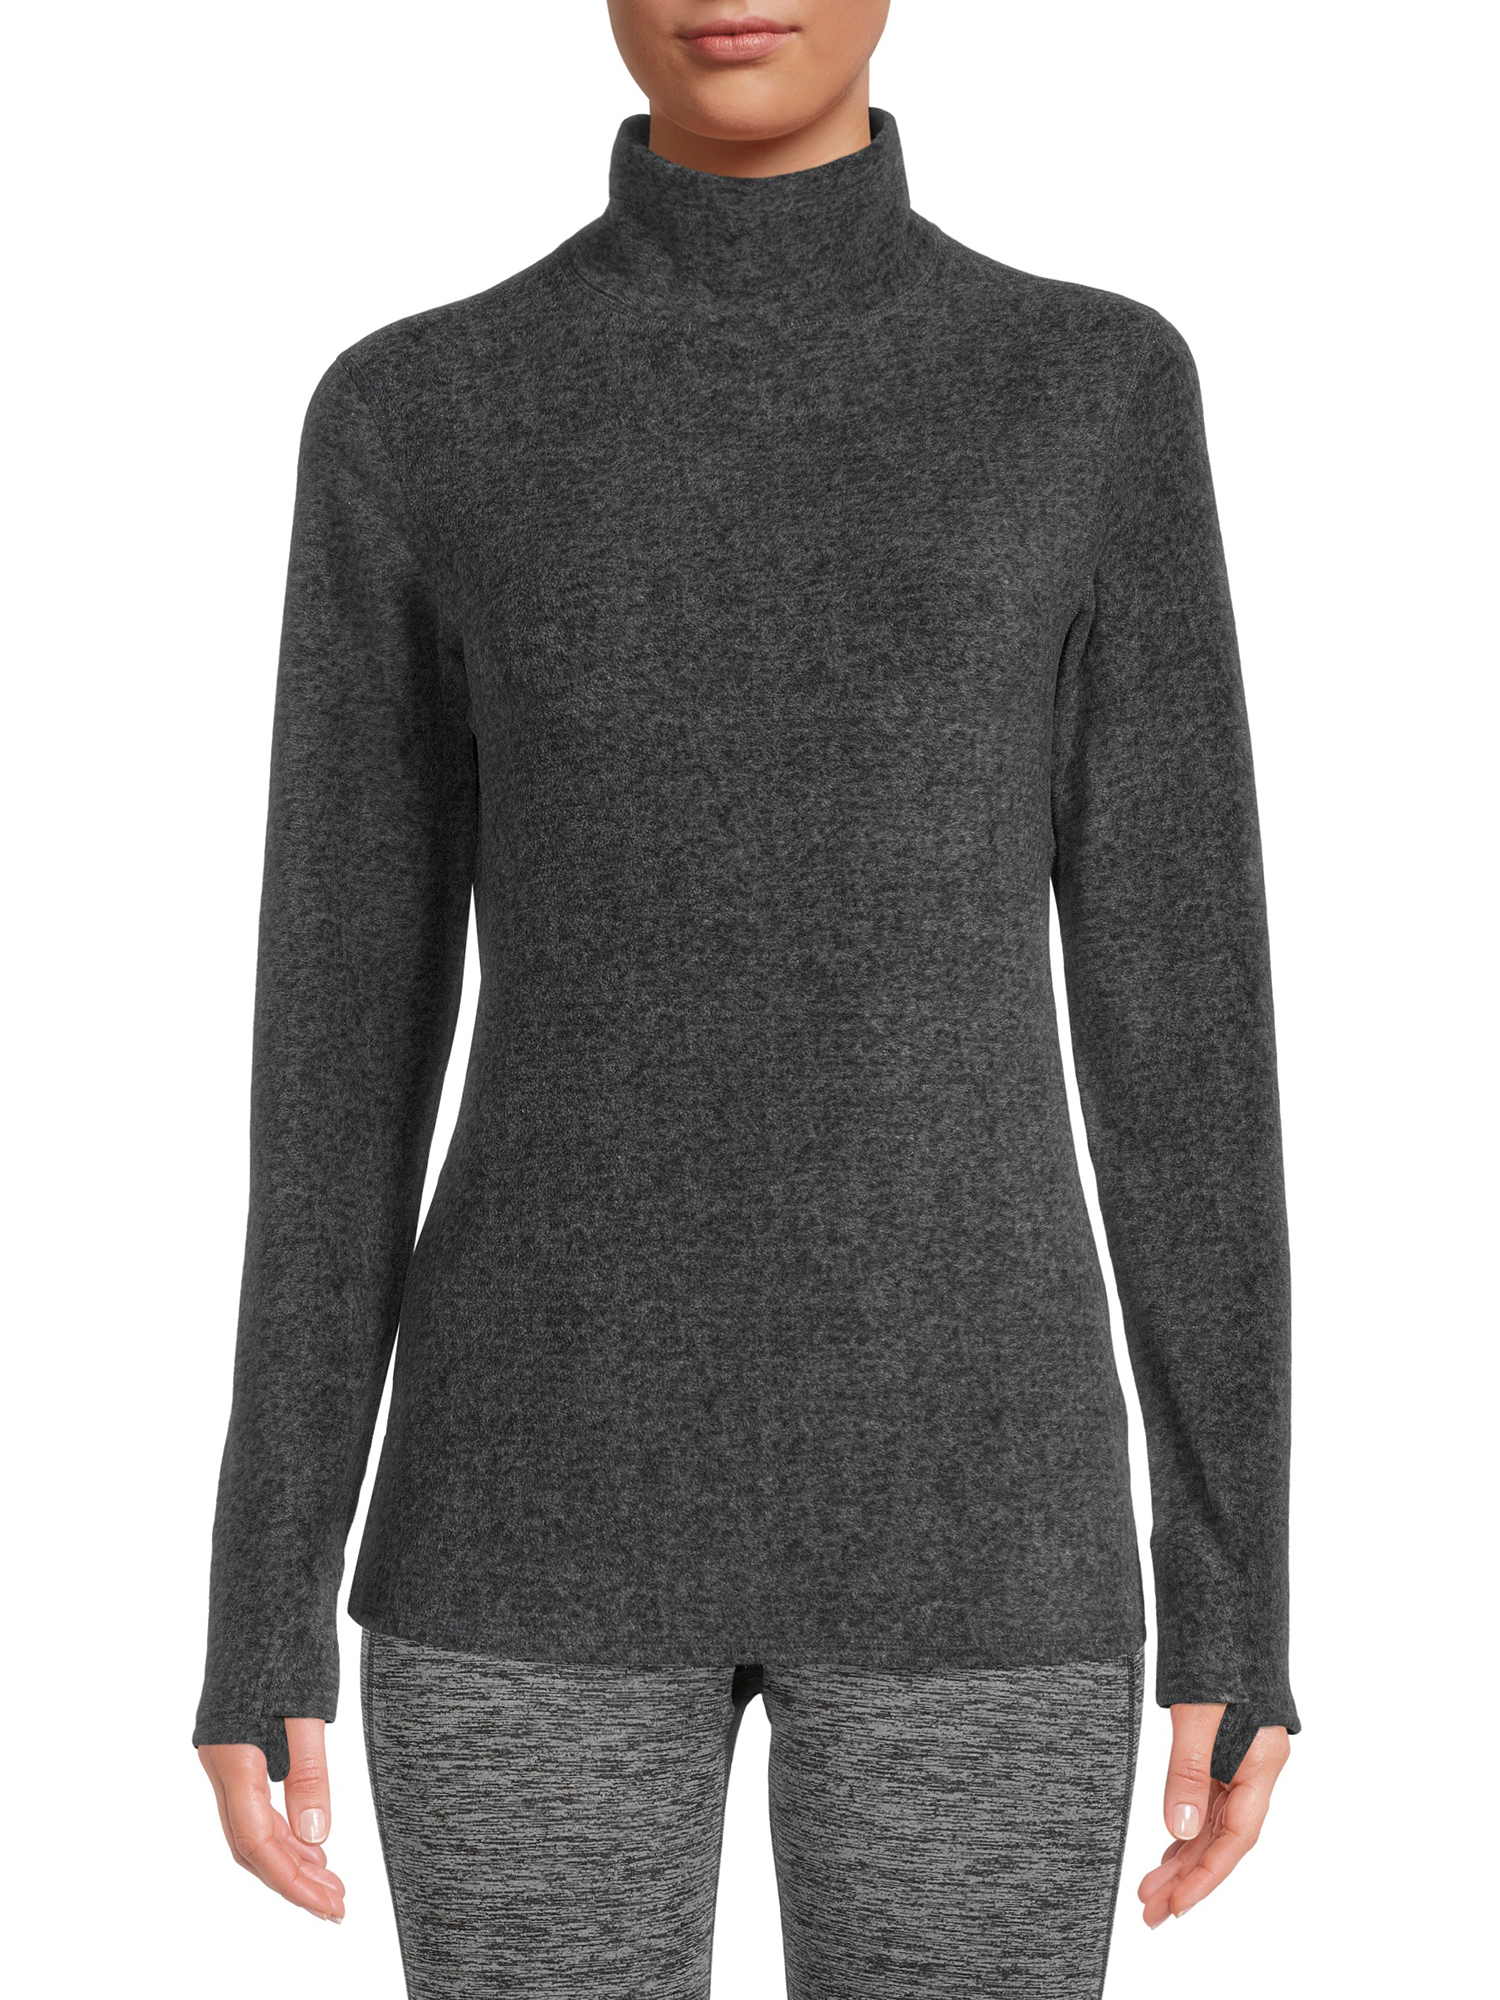 ClimateRight by Cuddl Duds Stretch Fleece Women's Long Sleeve ...